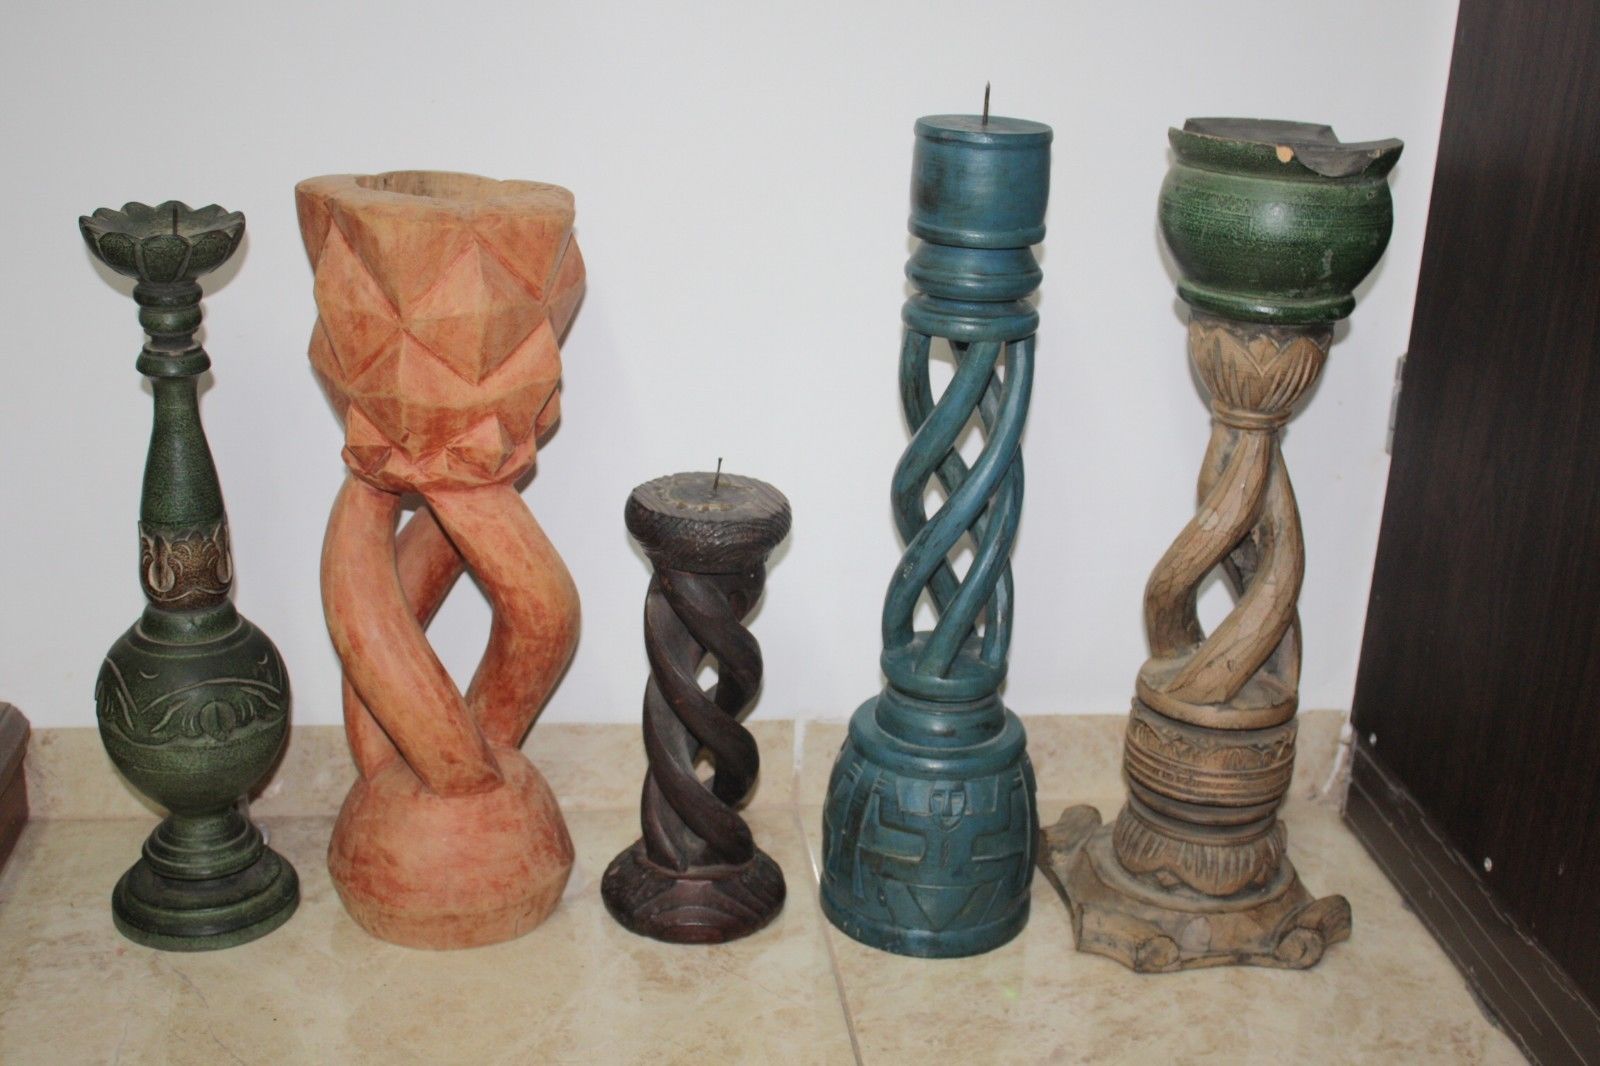 Antique Twisted Wooden Floor Candle Holder Сandlestick Hand Carved Large 20" - $78.65